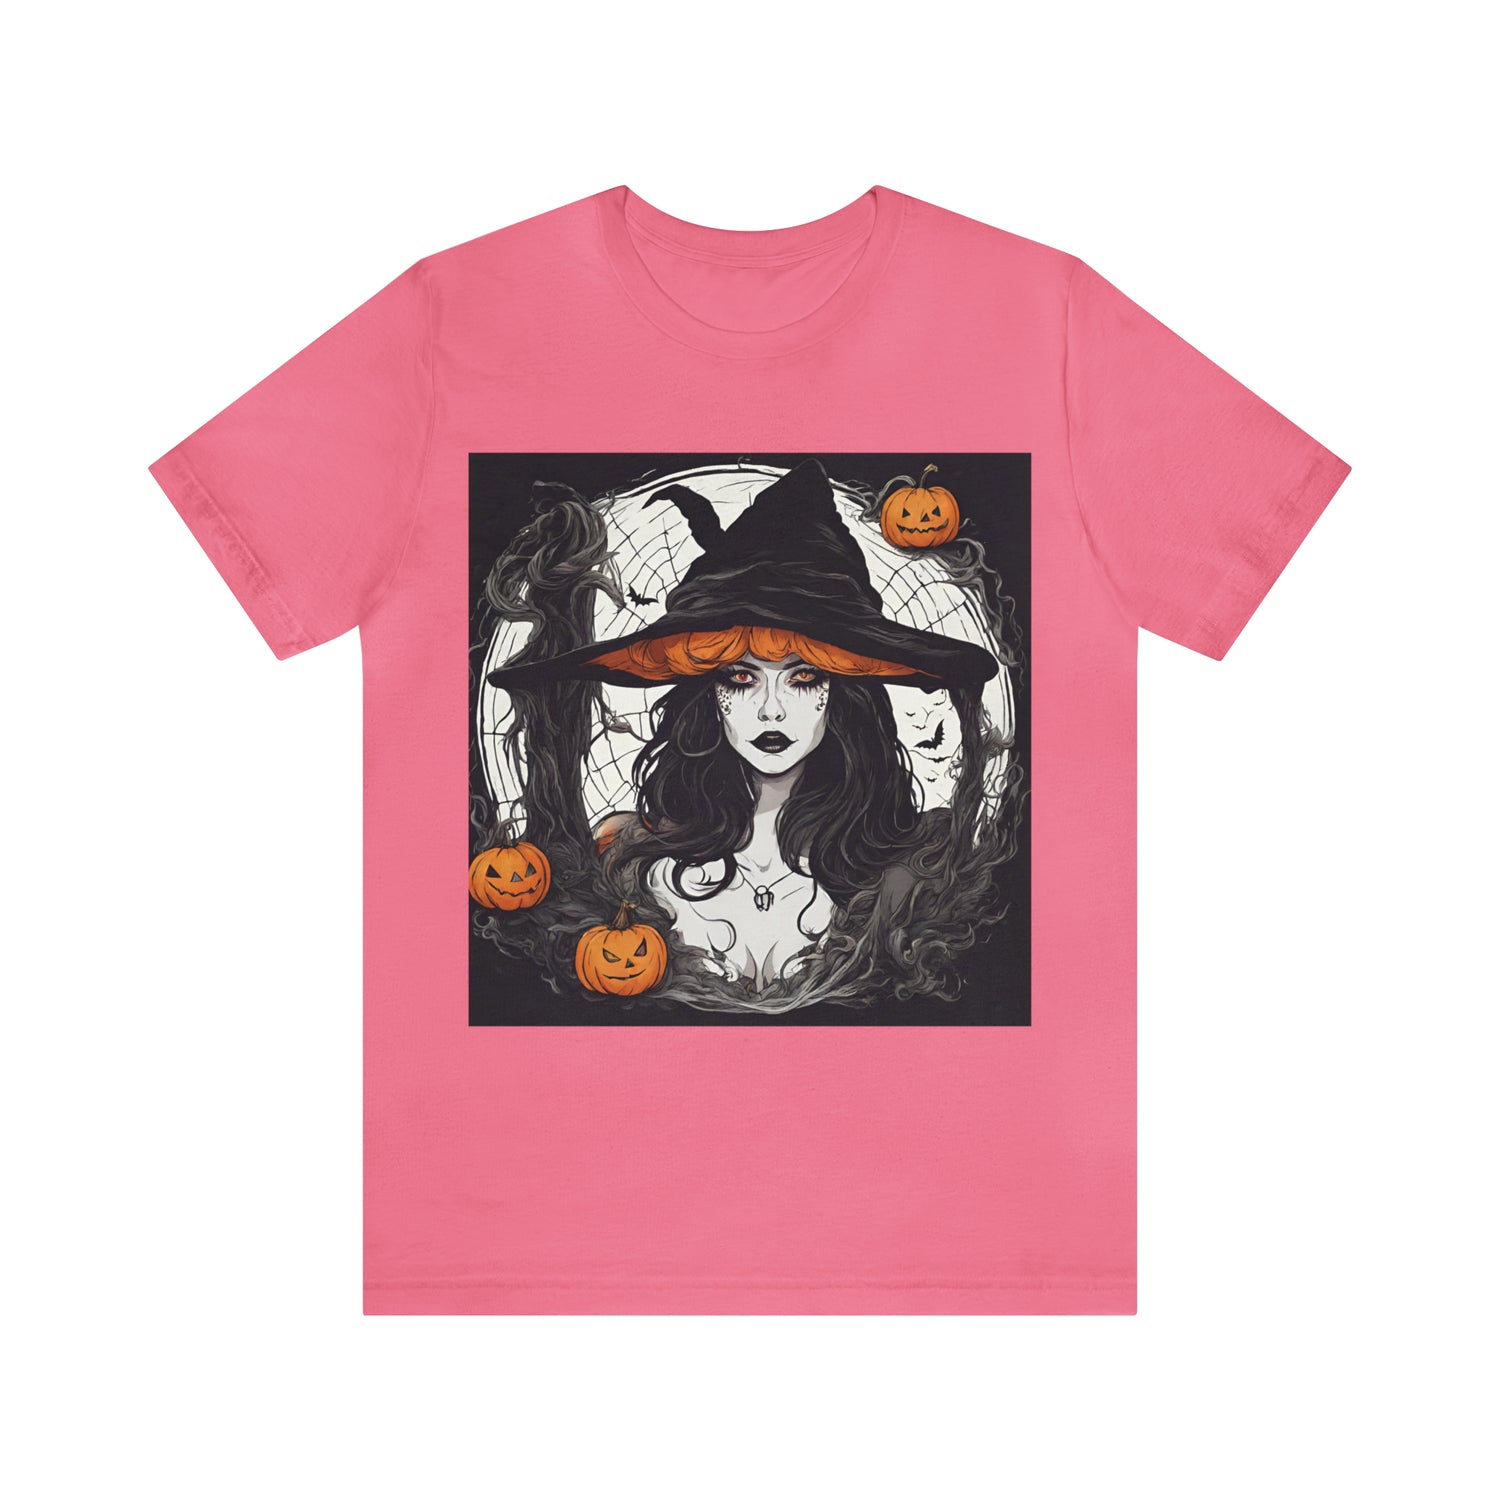 Charity Pink T-Shirt Tshirt Design Halloween Gift for Friend and Family Short Sleeved Shirt Petrova Designs